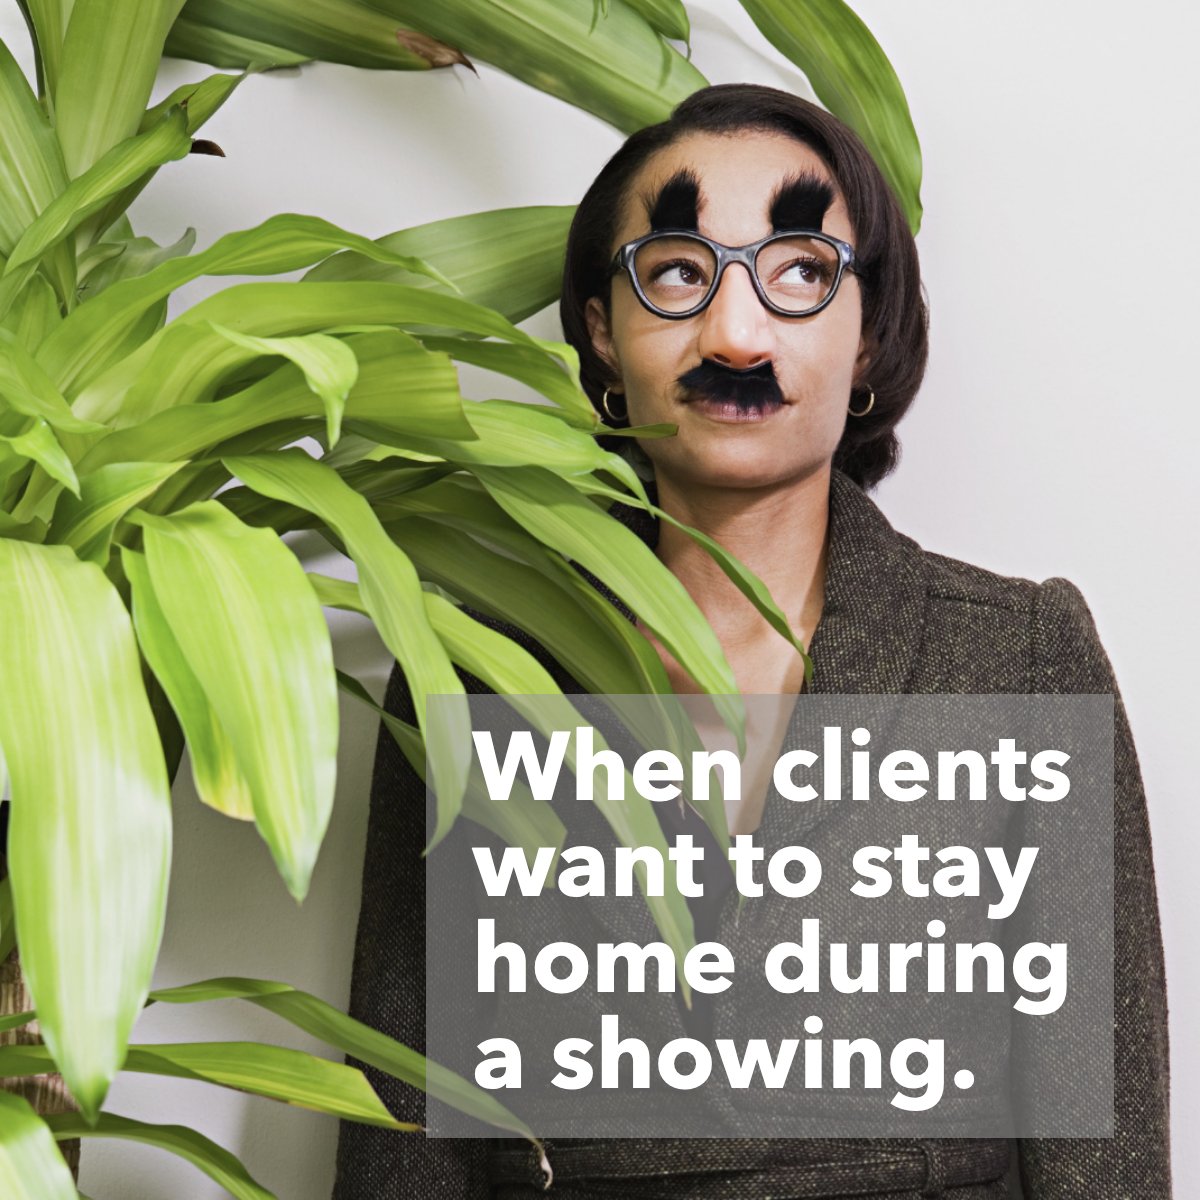 Clients be like, Incognito mode: ON 🕵 🦸‍♂️

#realestatehumor #realestatejokes #incognito #showing #clients #openhouse
 #tampa #remaxpremiergroup #tamparealestate #remax #tamparealtor #tampahomesforsale